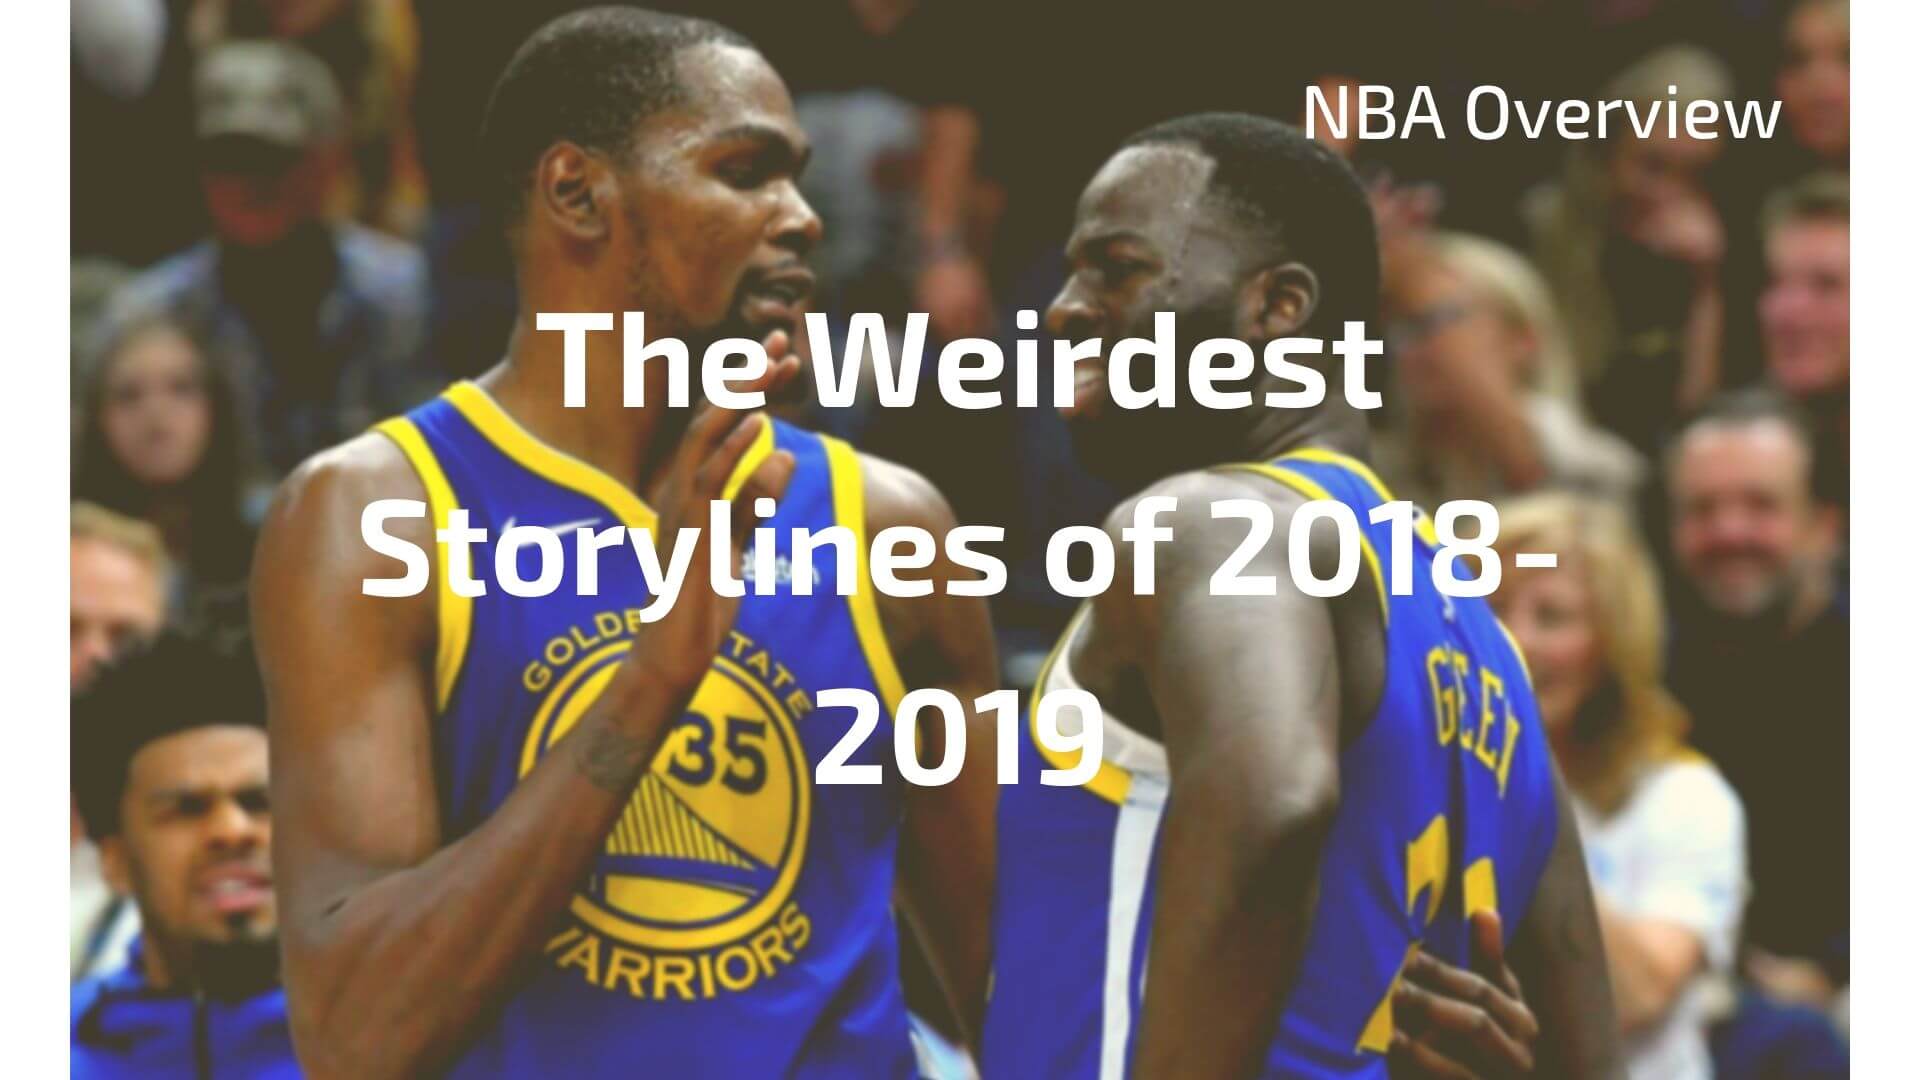 The Weirdest Nba Storylines Of 2018-2019 Are All Right - Kevin Durant Draymond Green - HD Wallpaper 